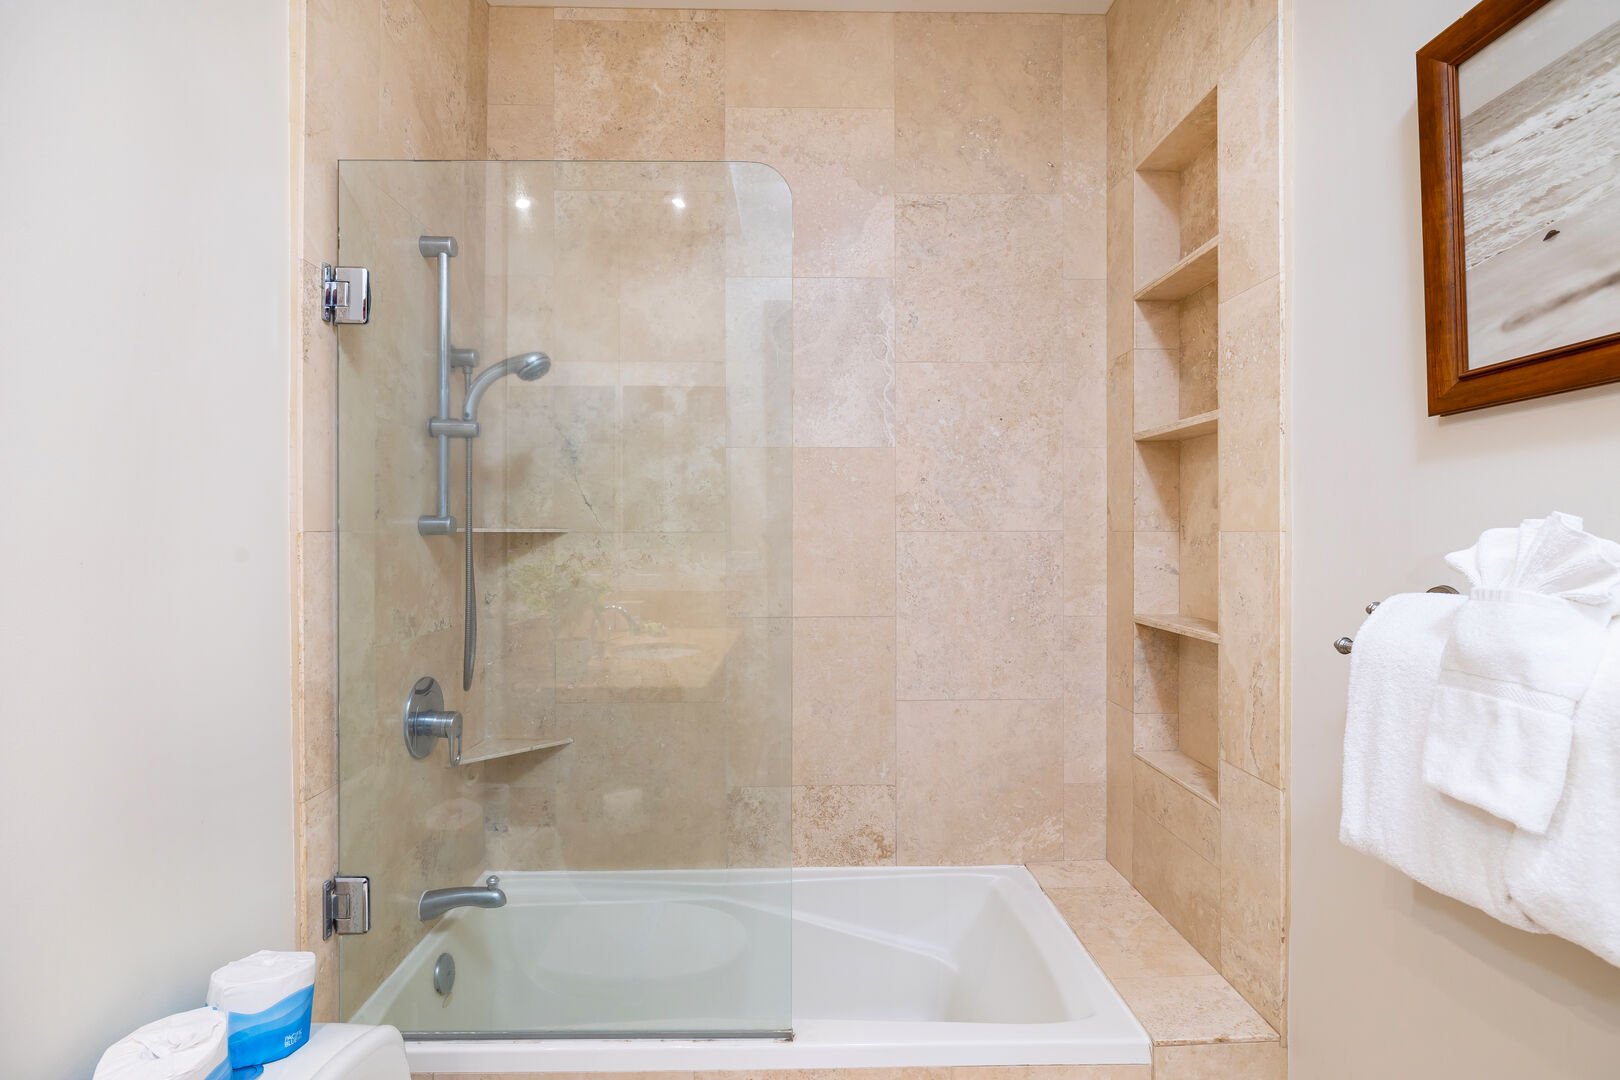 Refreshed in your bathroom with tub and shower combination!